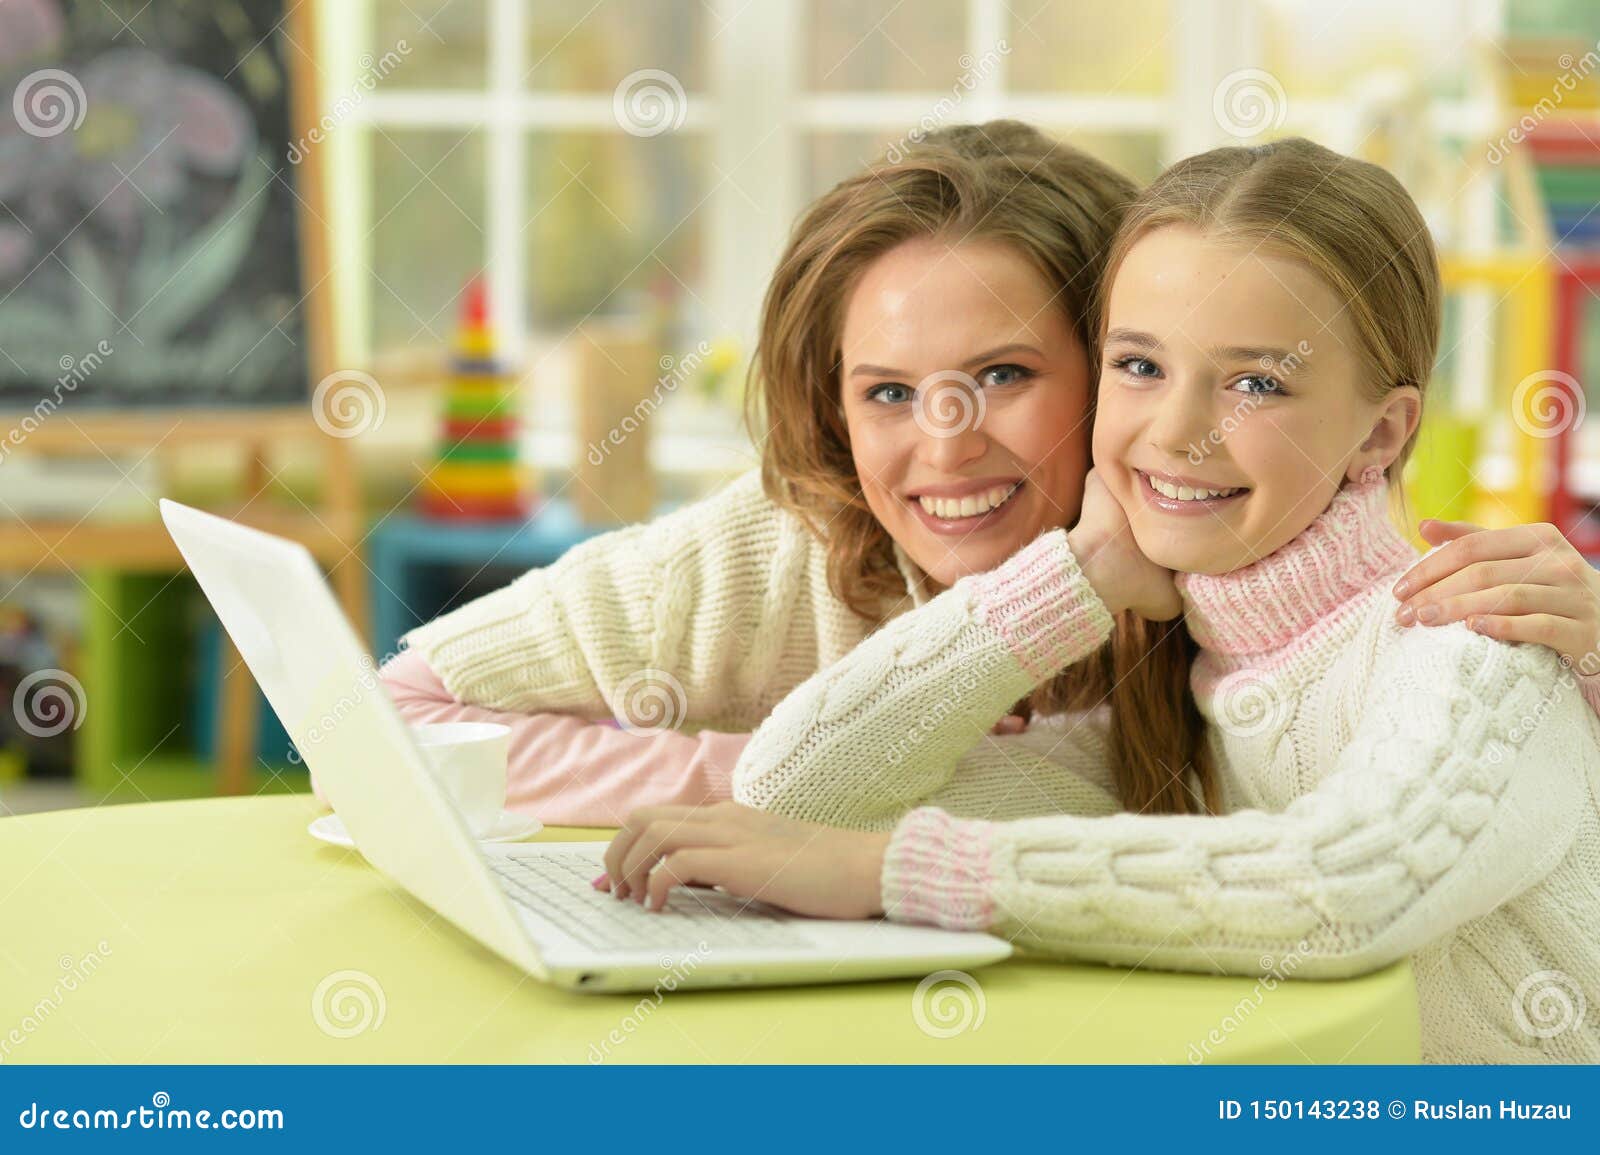 Mother And Daughter Wiping A Table Stock Image - Image of 